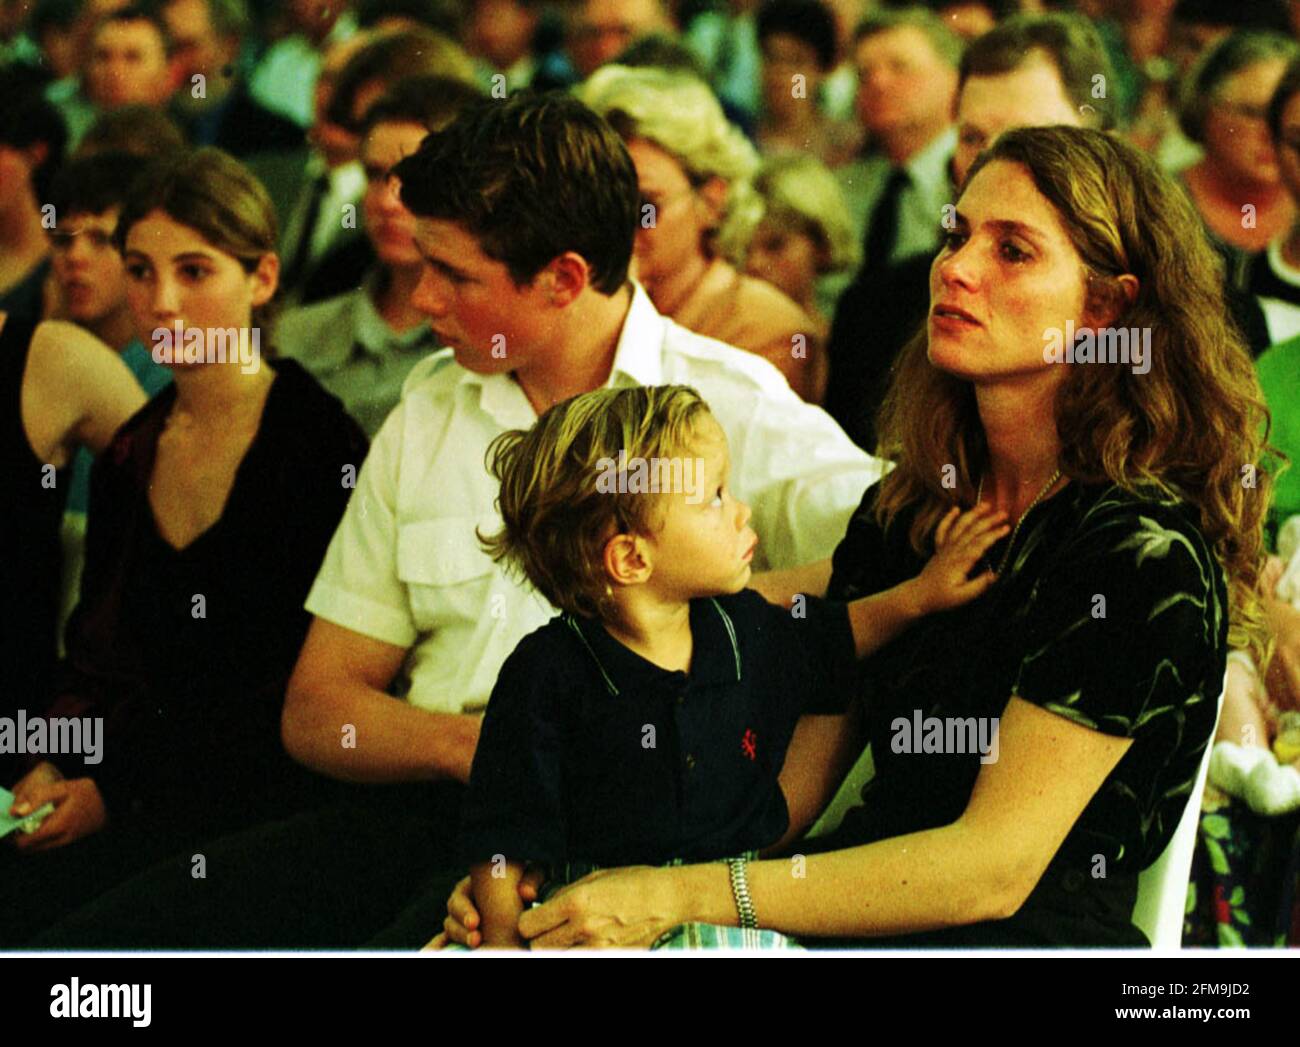 Zimbabwe Farmers Unrest April 2000 Memorial service to murdered white farmer David Stevens, in the Andy Millar hall Harare Zimbabwe.David Steven's widow, Maria with her son (one of the twins)Sebastian (2) on her lap son Mark (16) next to her, and daughter Brenda (14) next to him 25.4.00   Pic:JOHN VOOS Stock Photo